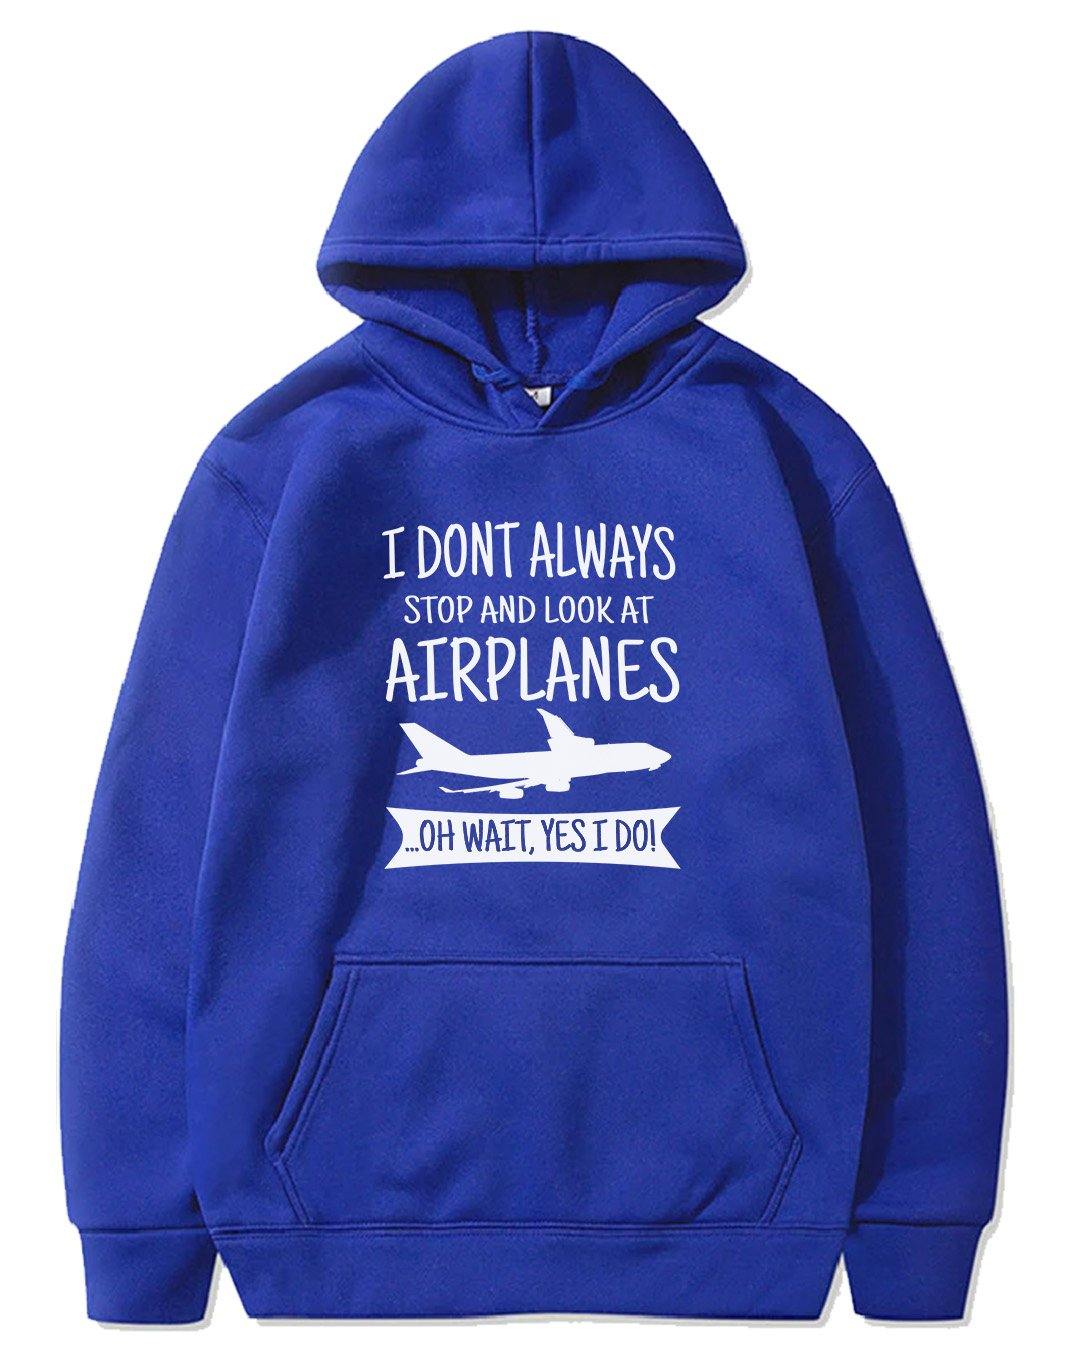 I DON'T ALWAYS STOP AND LOOK AT AIRPLANES,YES I DO T-SHIRT PULLOVER THE AV8R